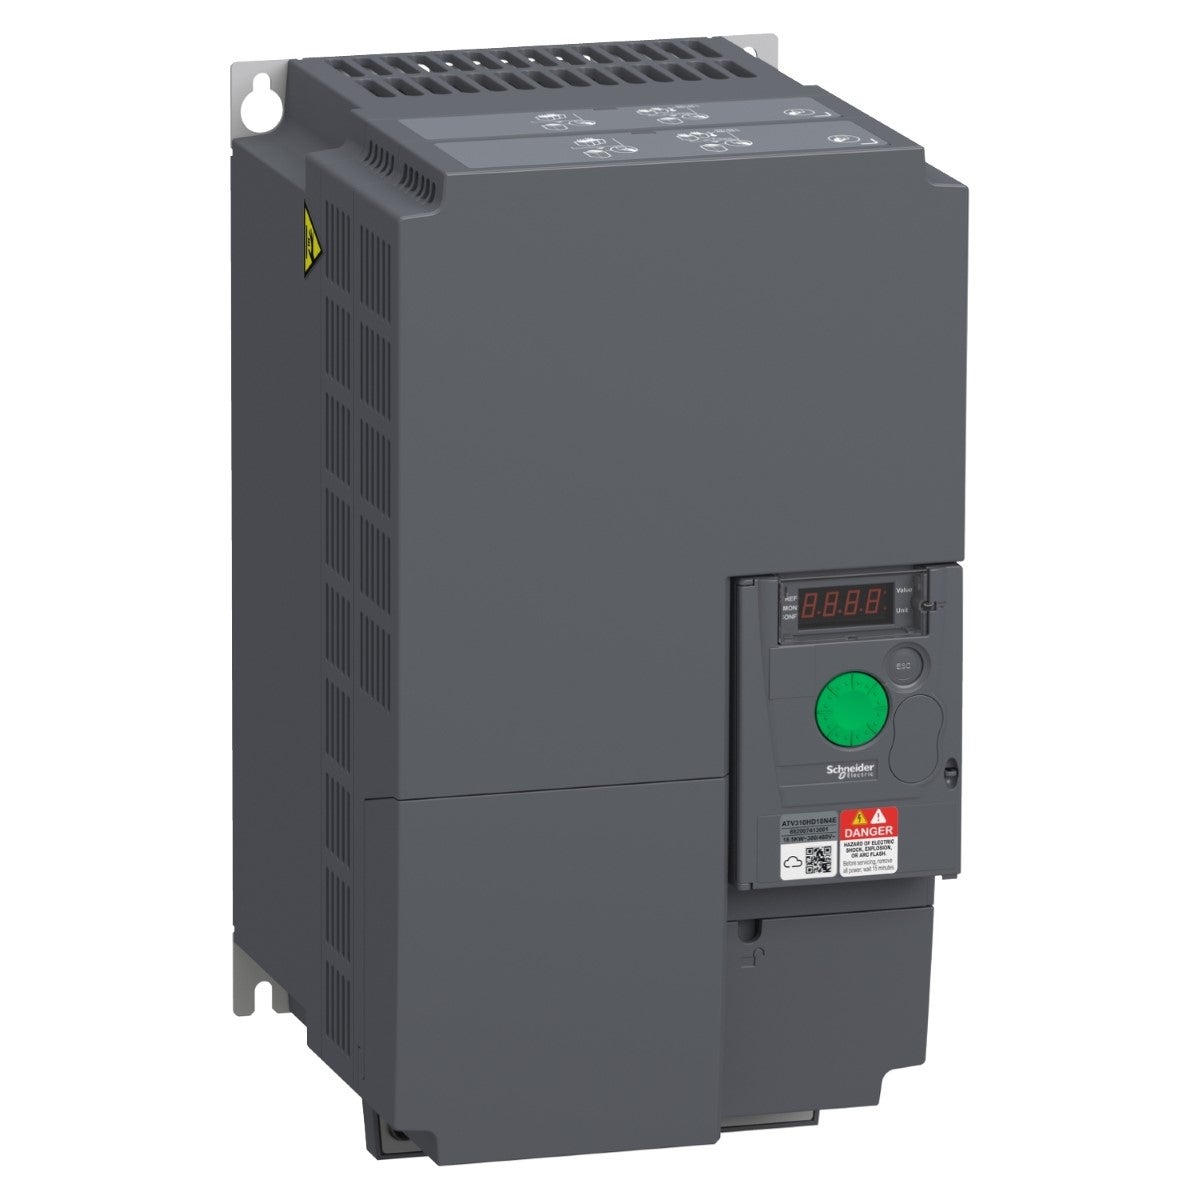 variable speed drive ATV310, 18.5 kW, 25 hp, 380...460 V, 3 phase, without filter